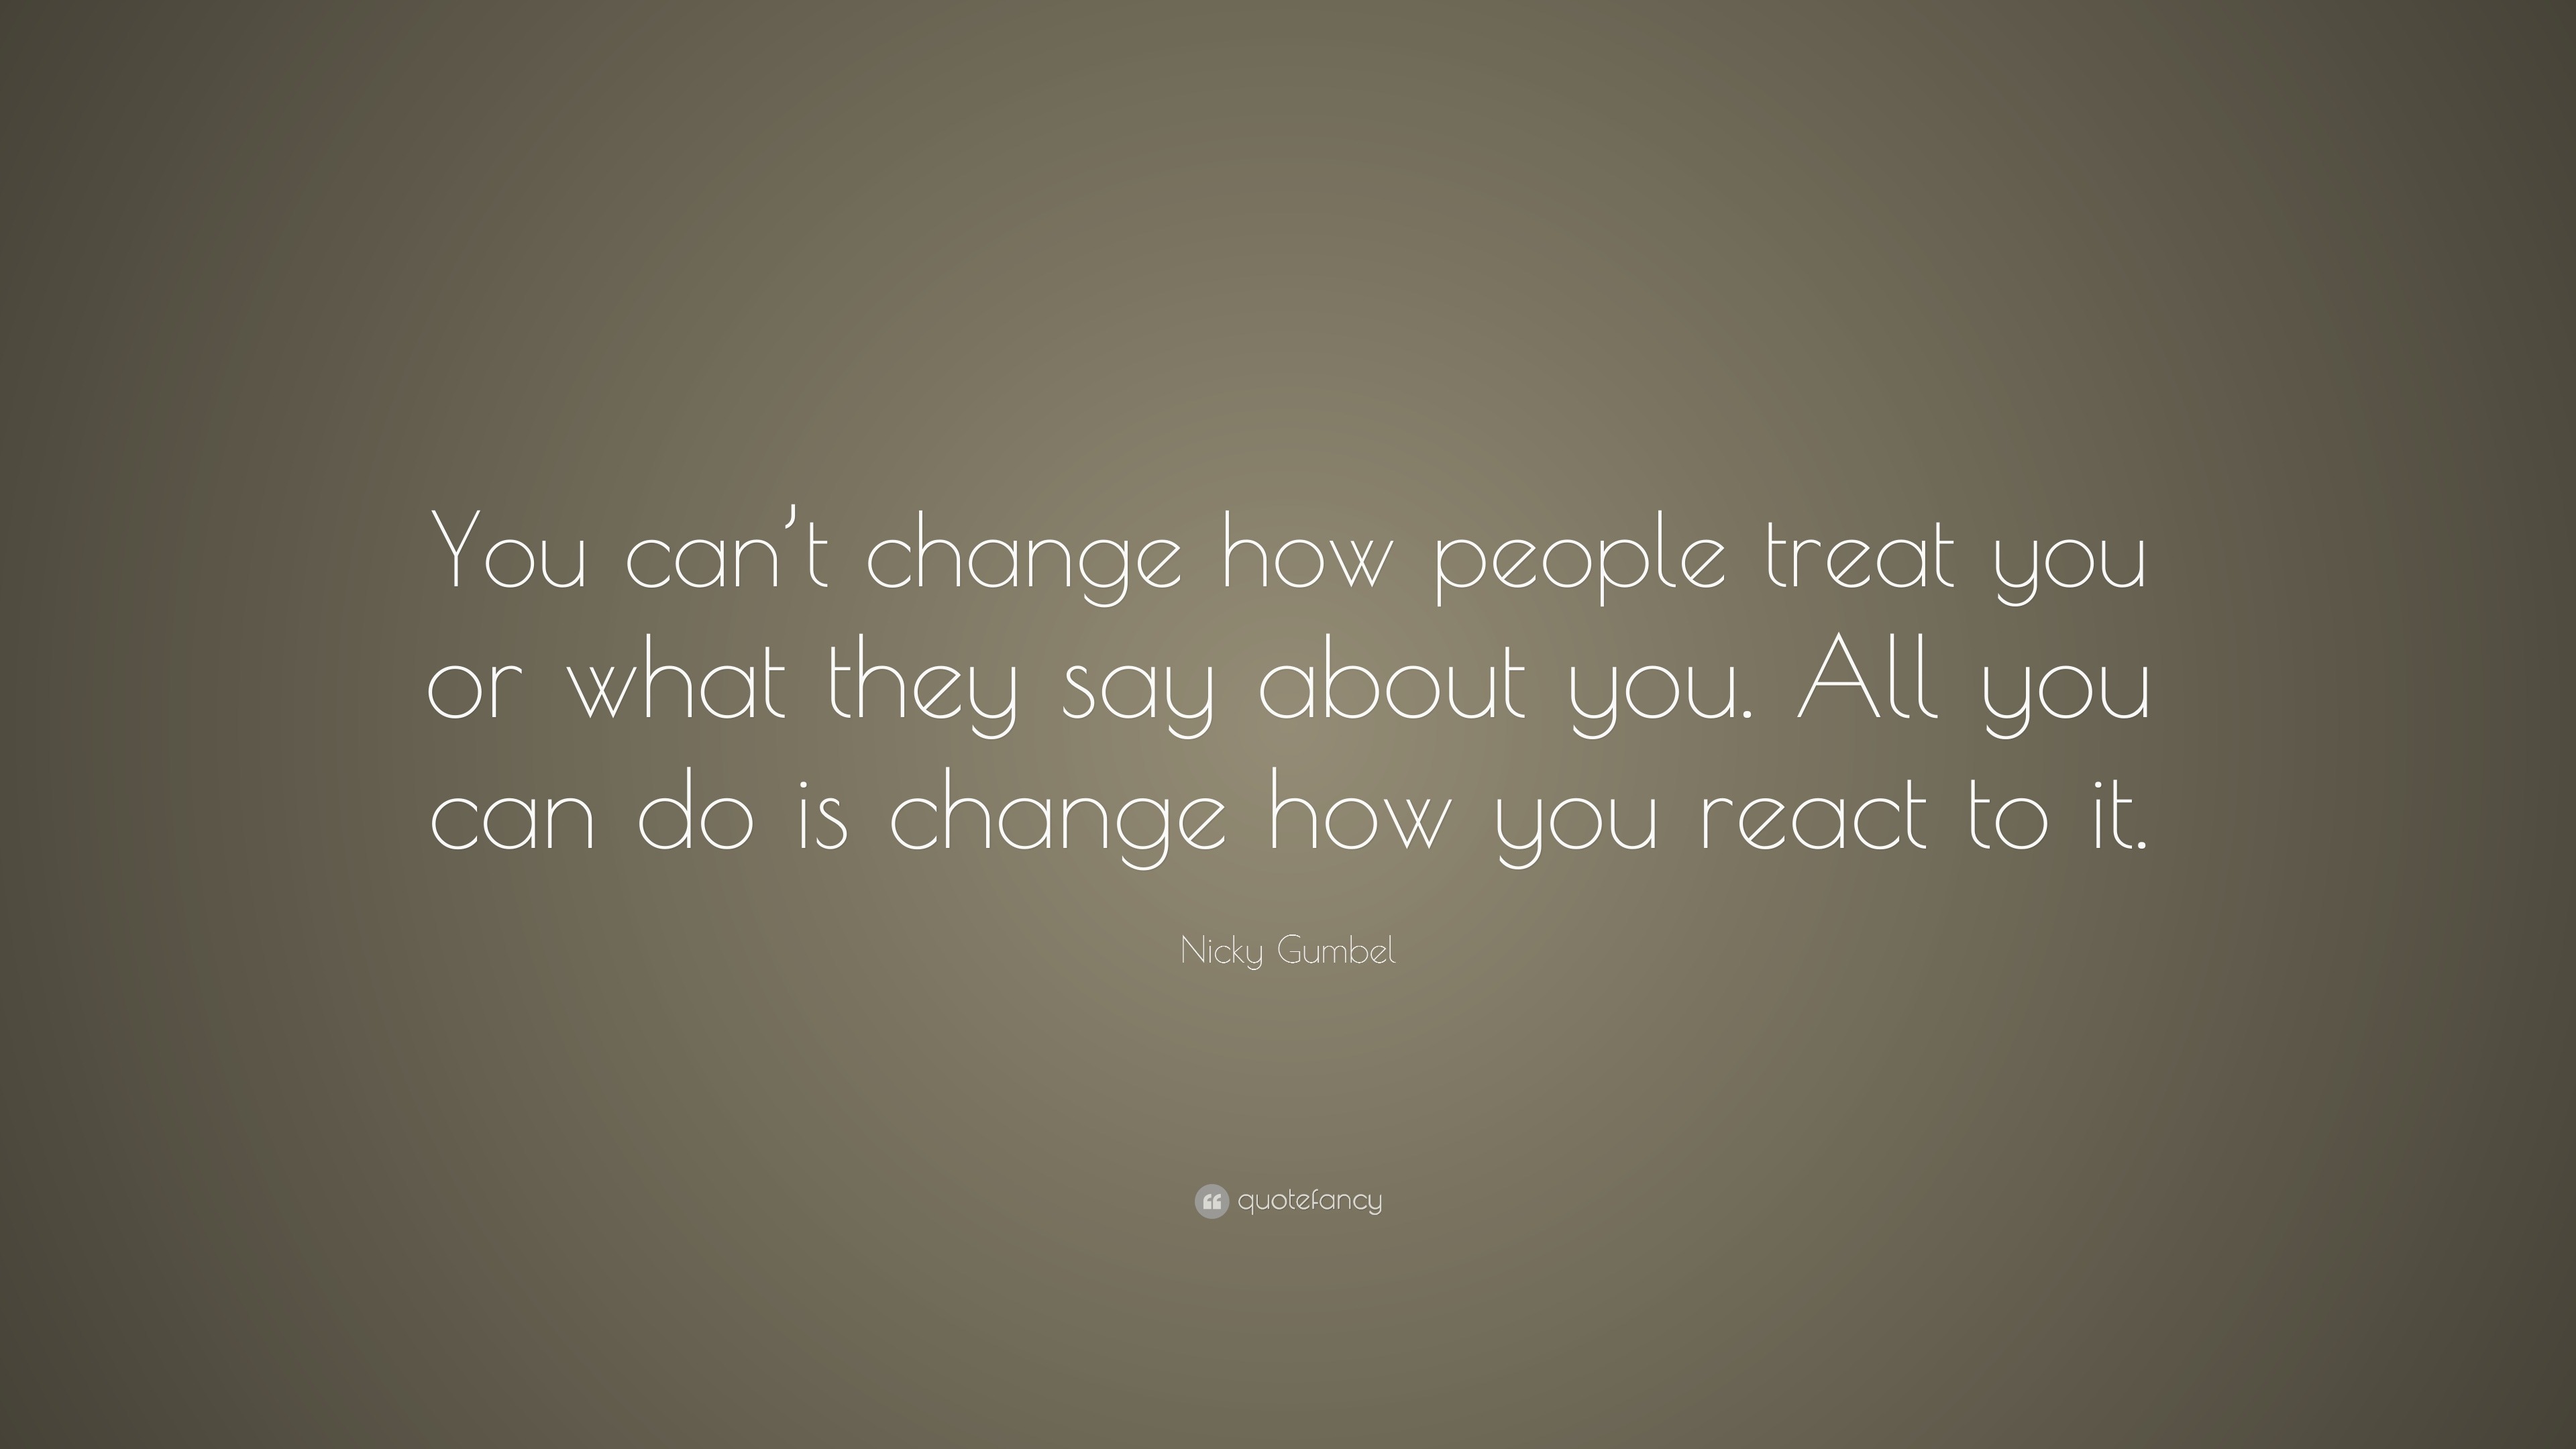 Nicky Gumbel Quote: “You can’t change how people treat you or what they ...